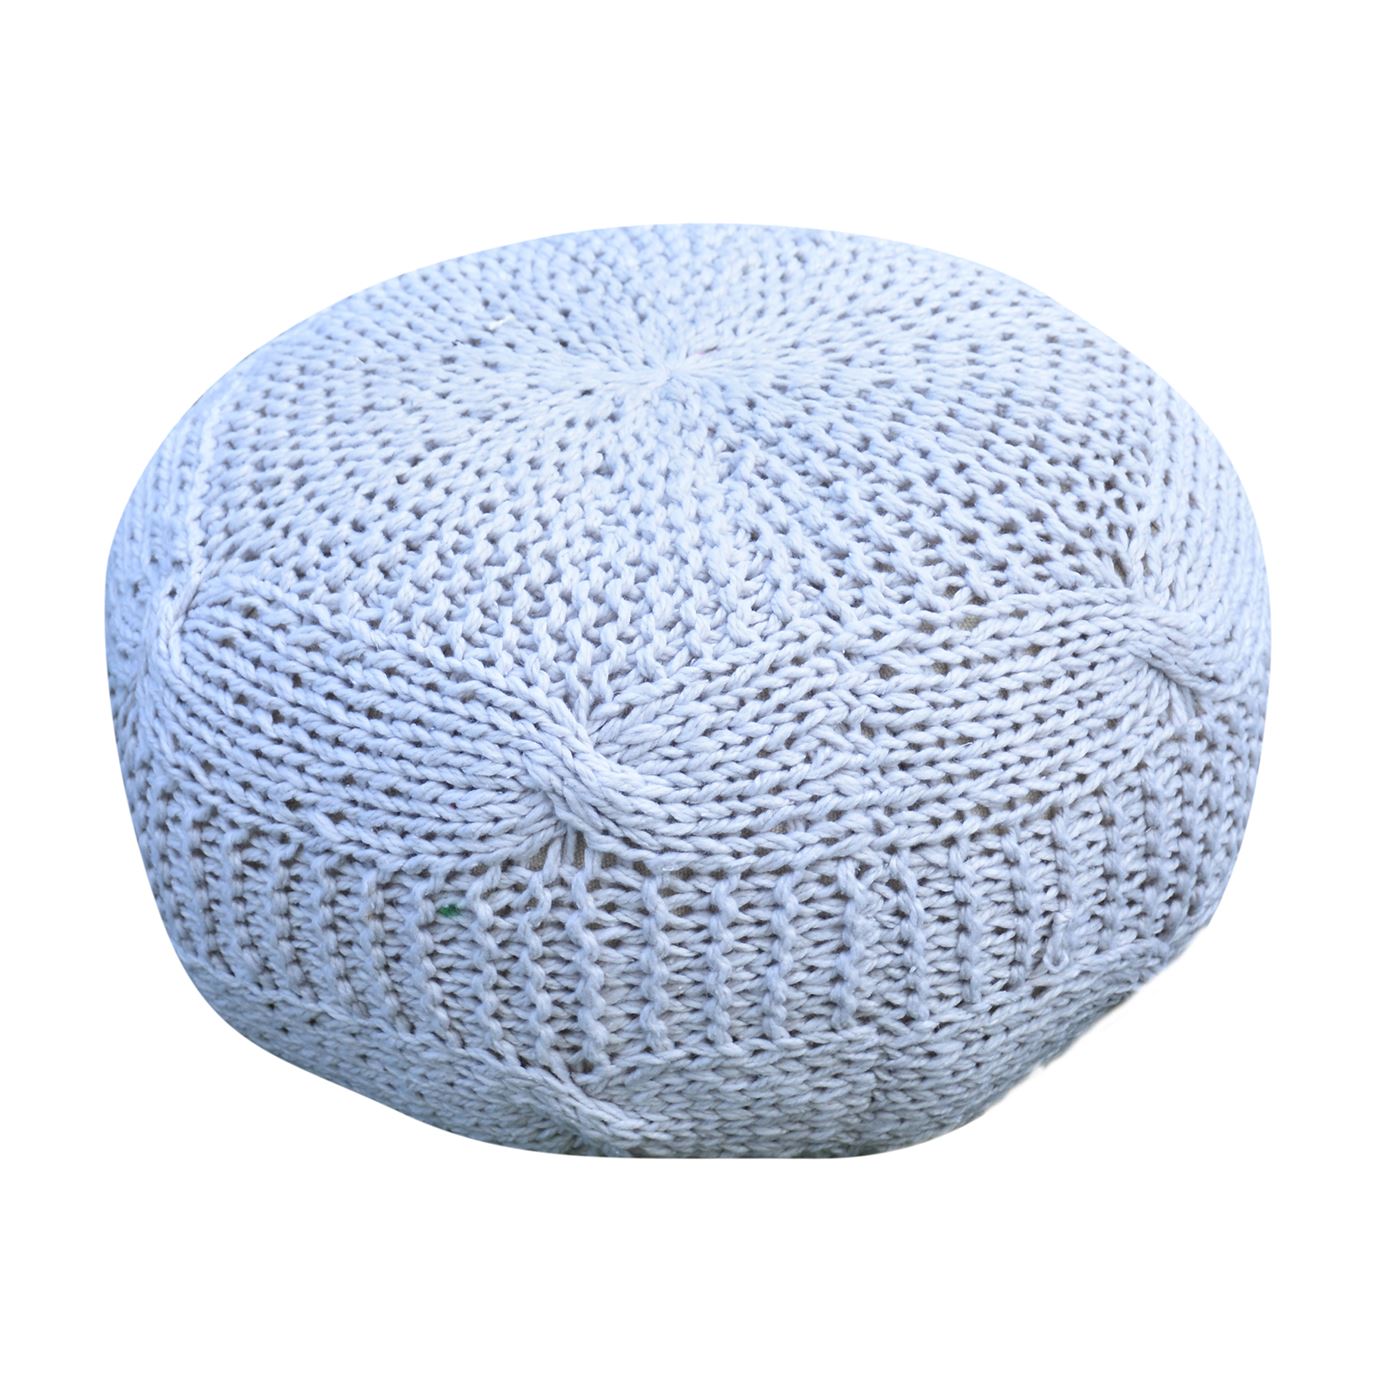 Romagna Pouf, Pet, Natural White, Hm Knitted, Flat Weave 